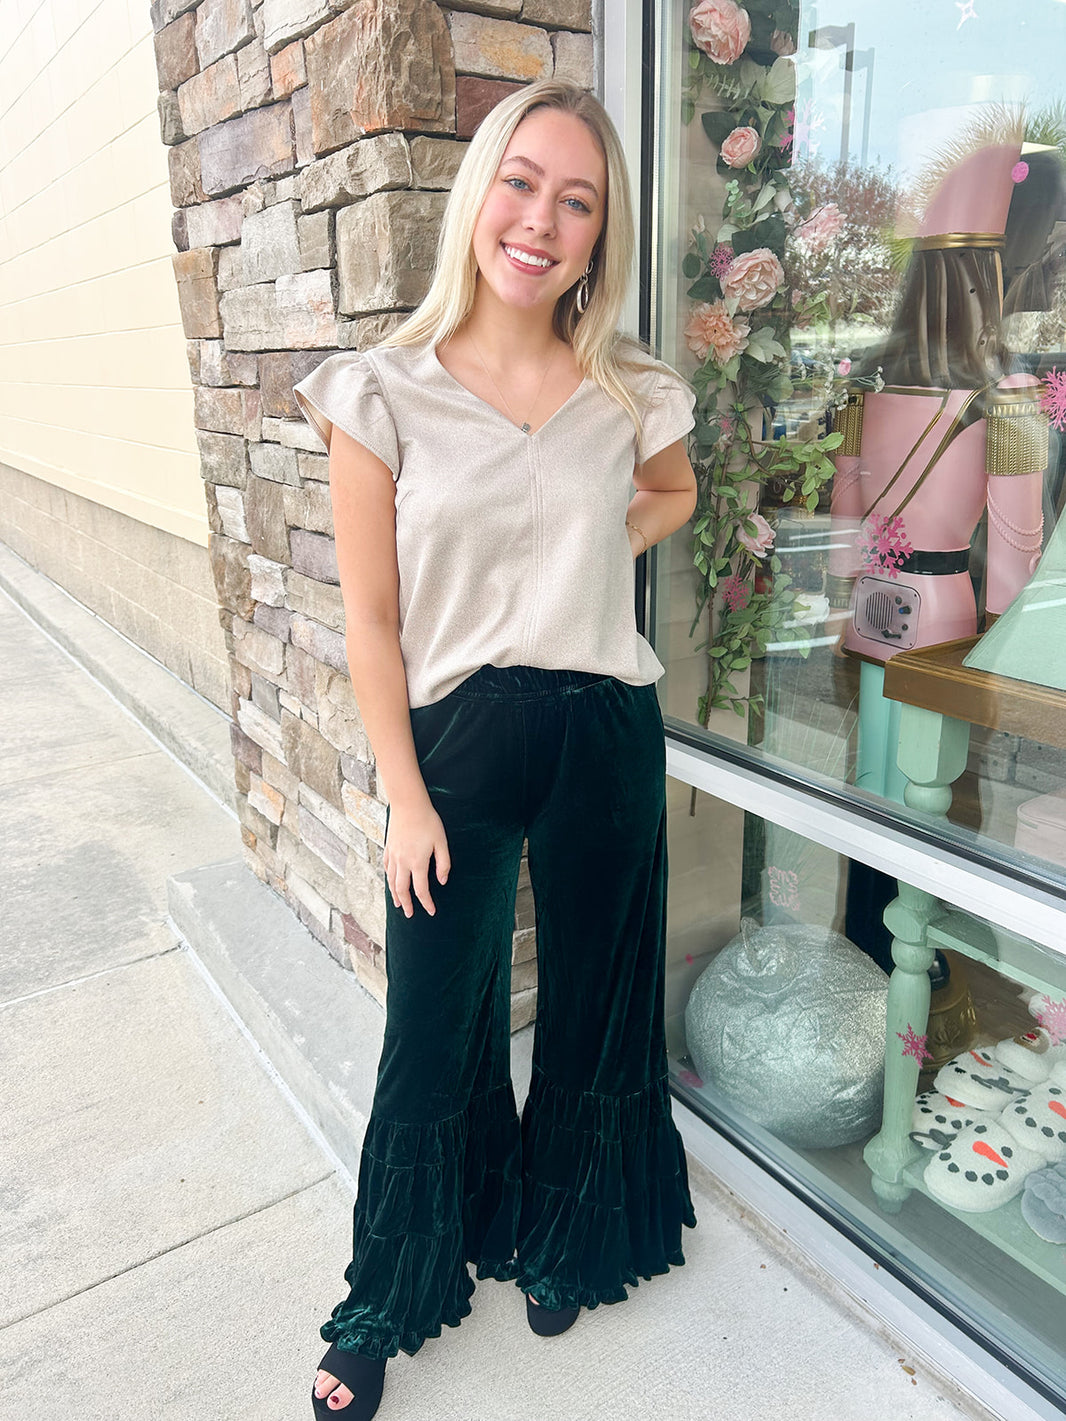 Stylish Women's Apparel in Tallahassee | The Pink Pineapple 850